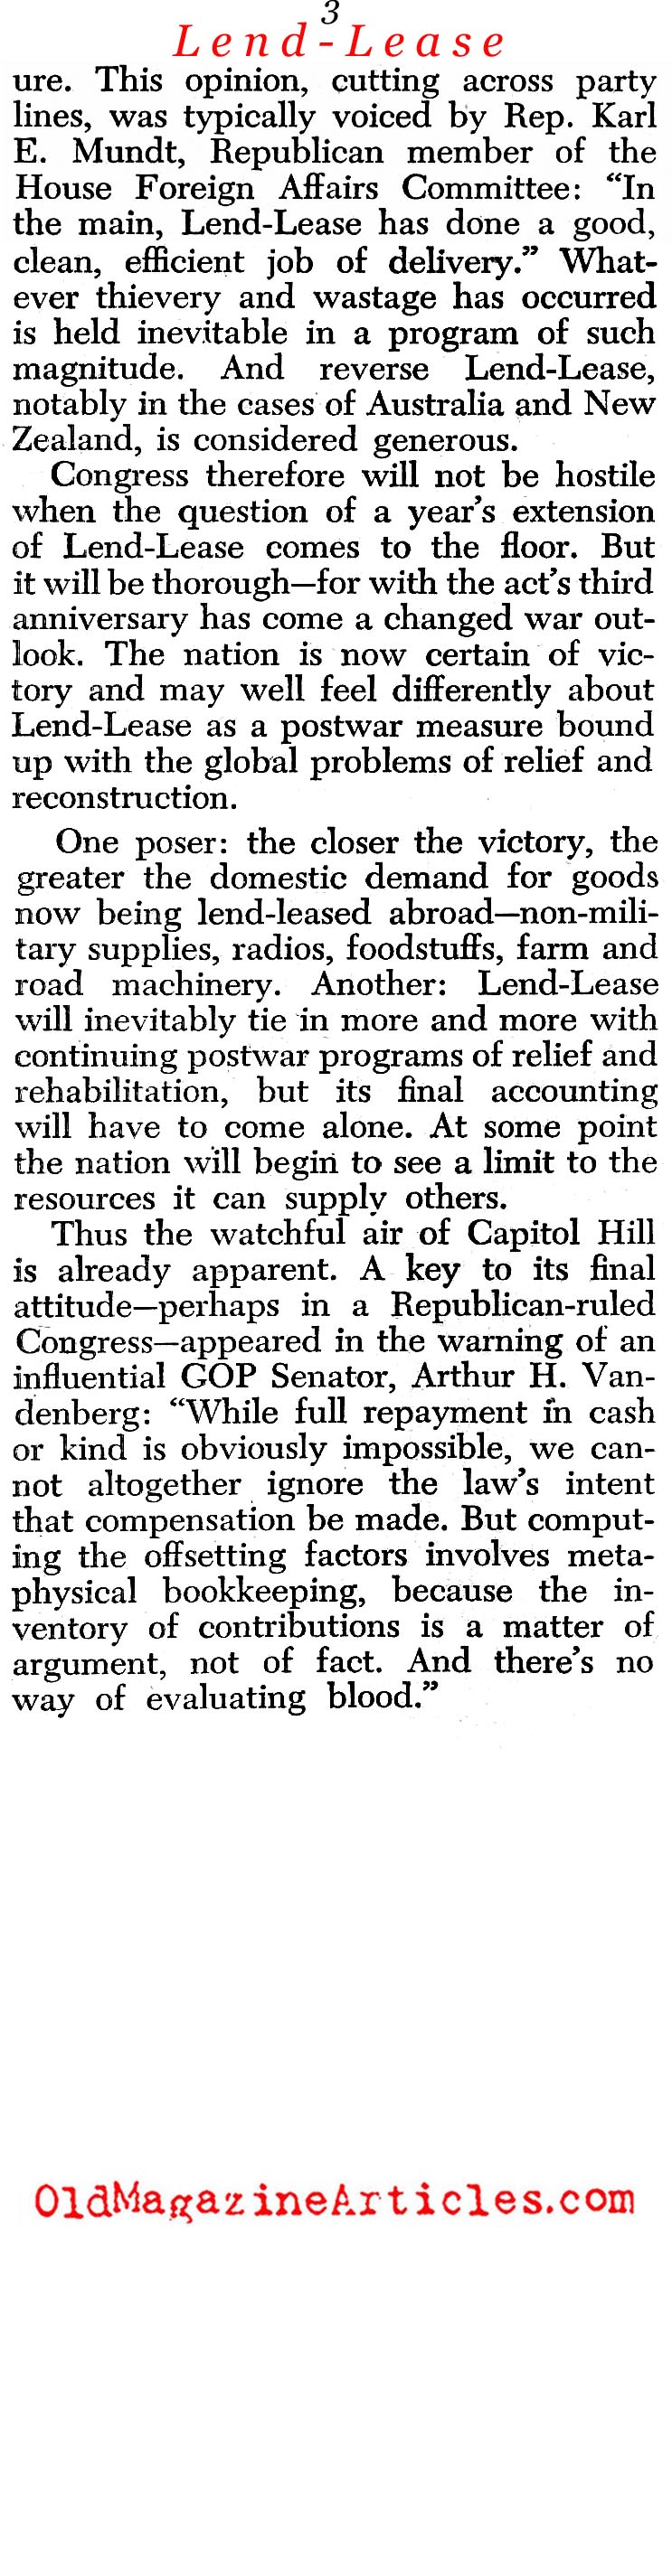 Highlights of the Lend-Lease Act (Newsweek Magazine, 1944)